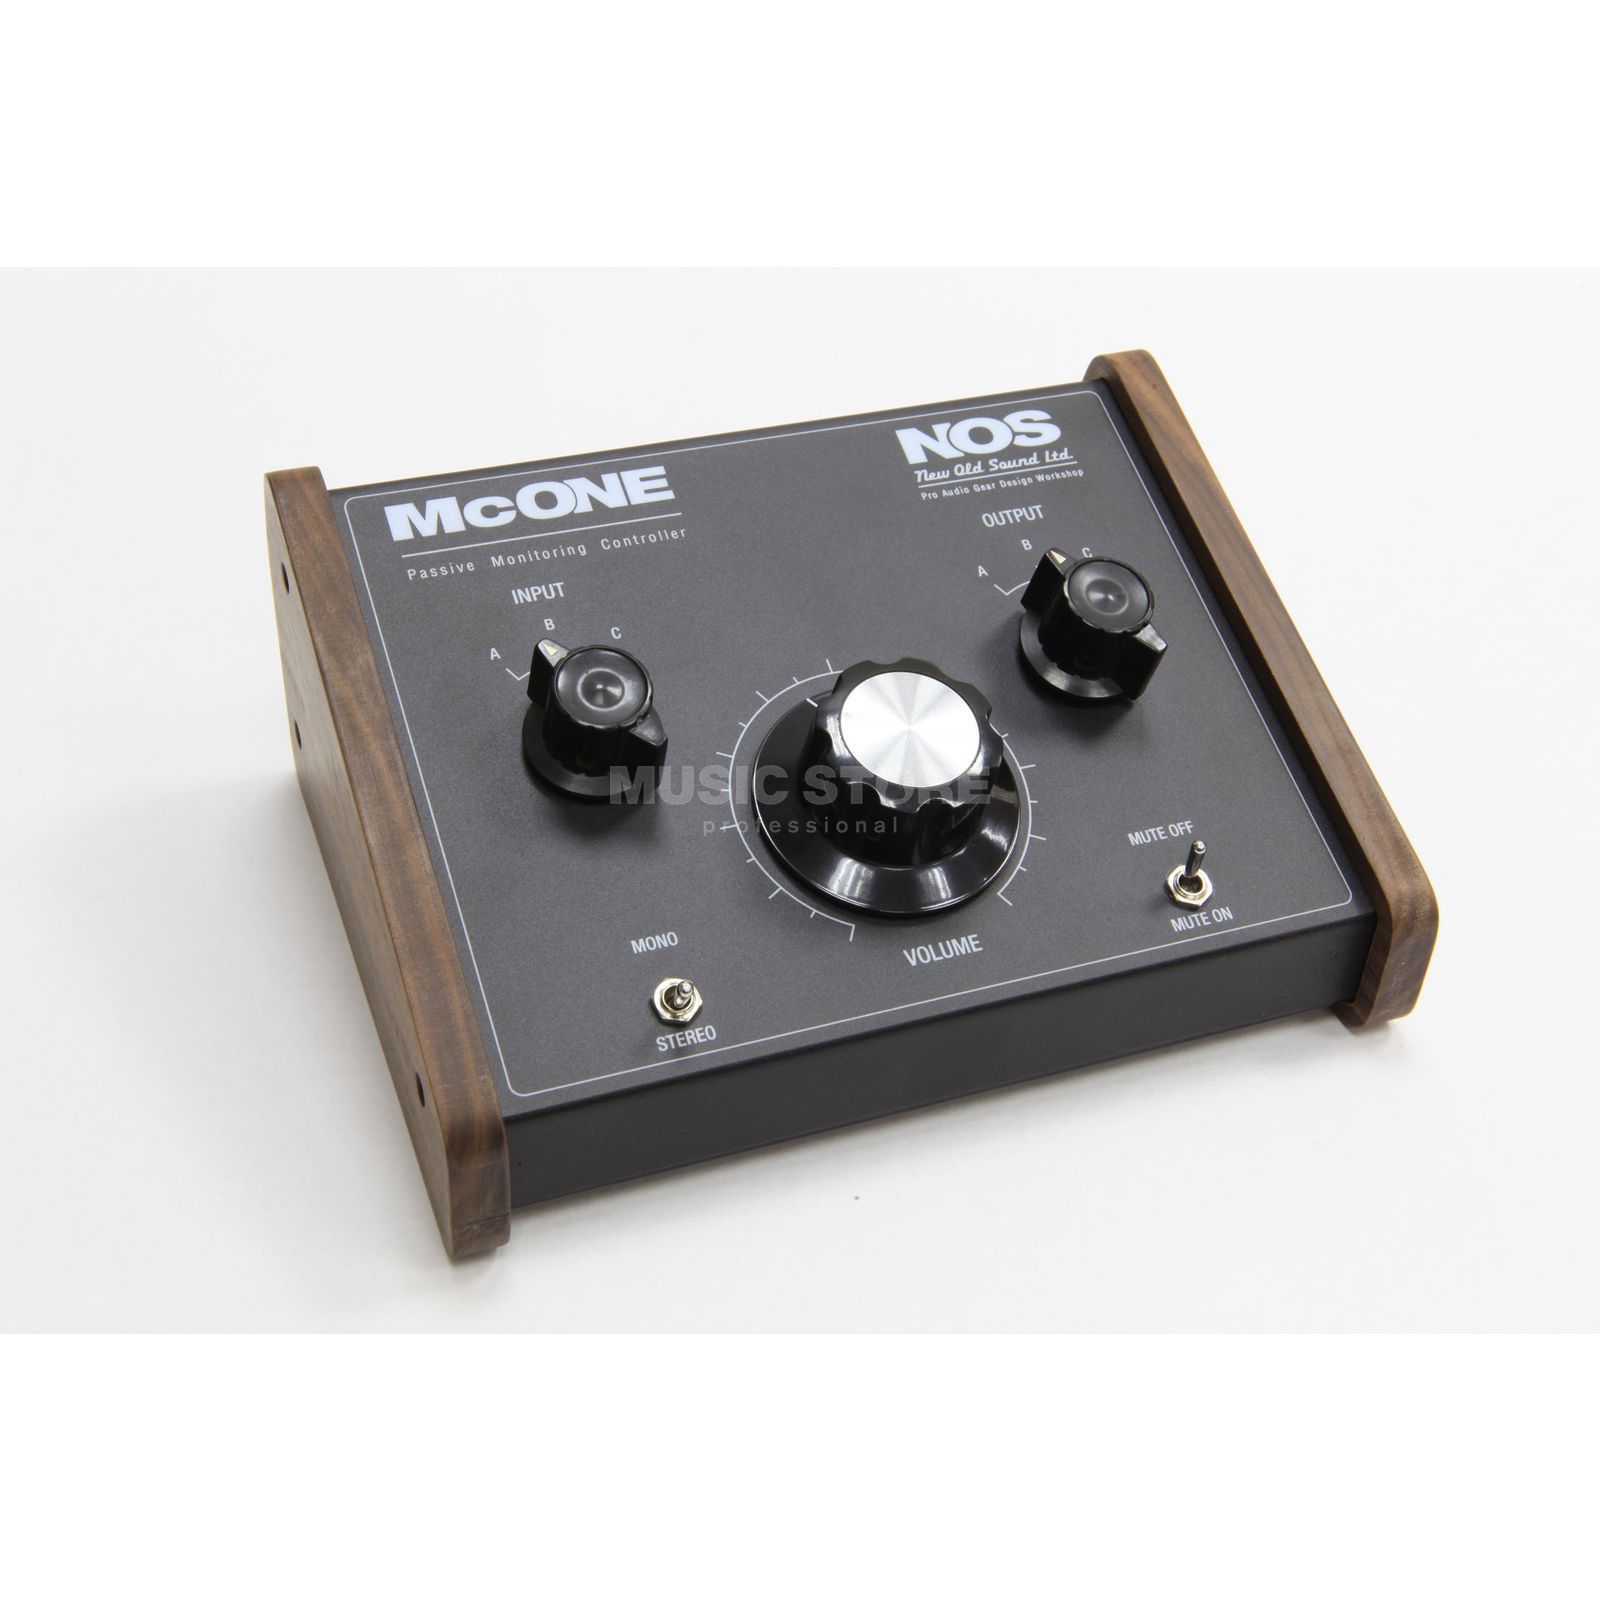 New Old Sound McONE Monitor Controller - Stepper